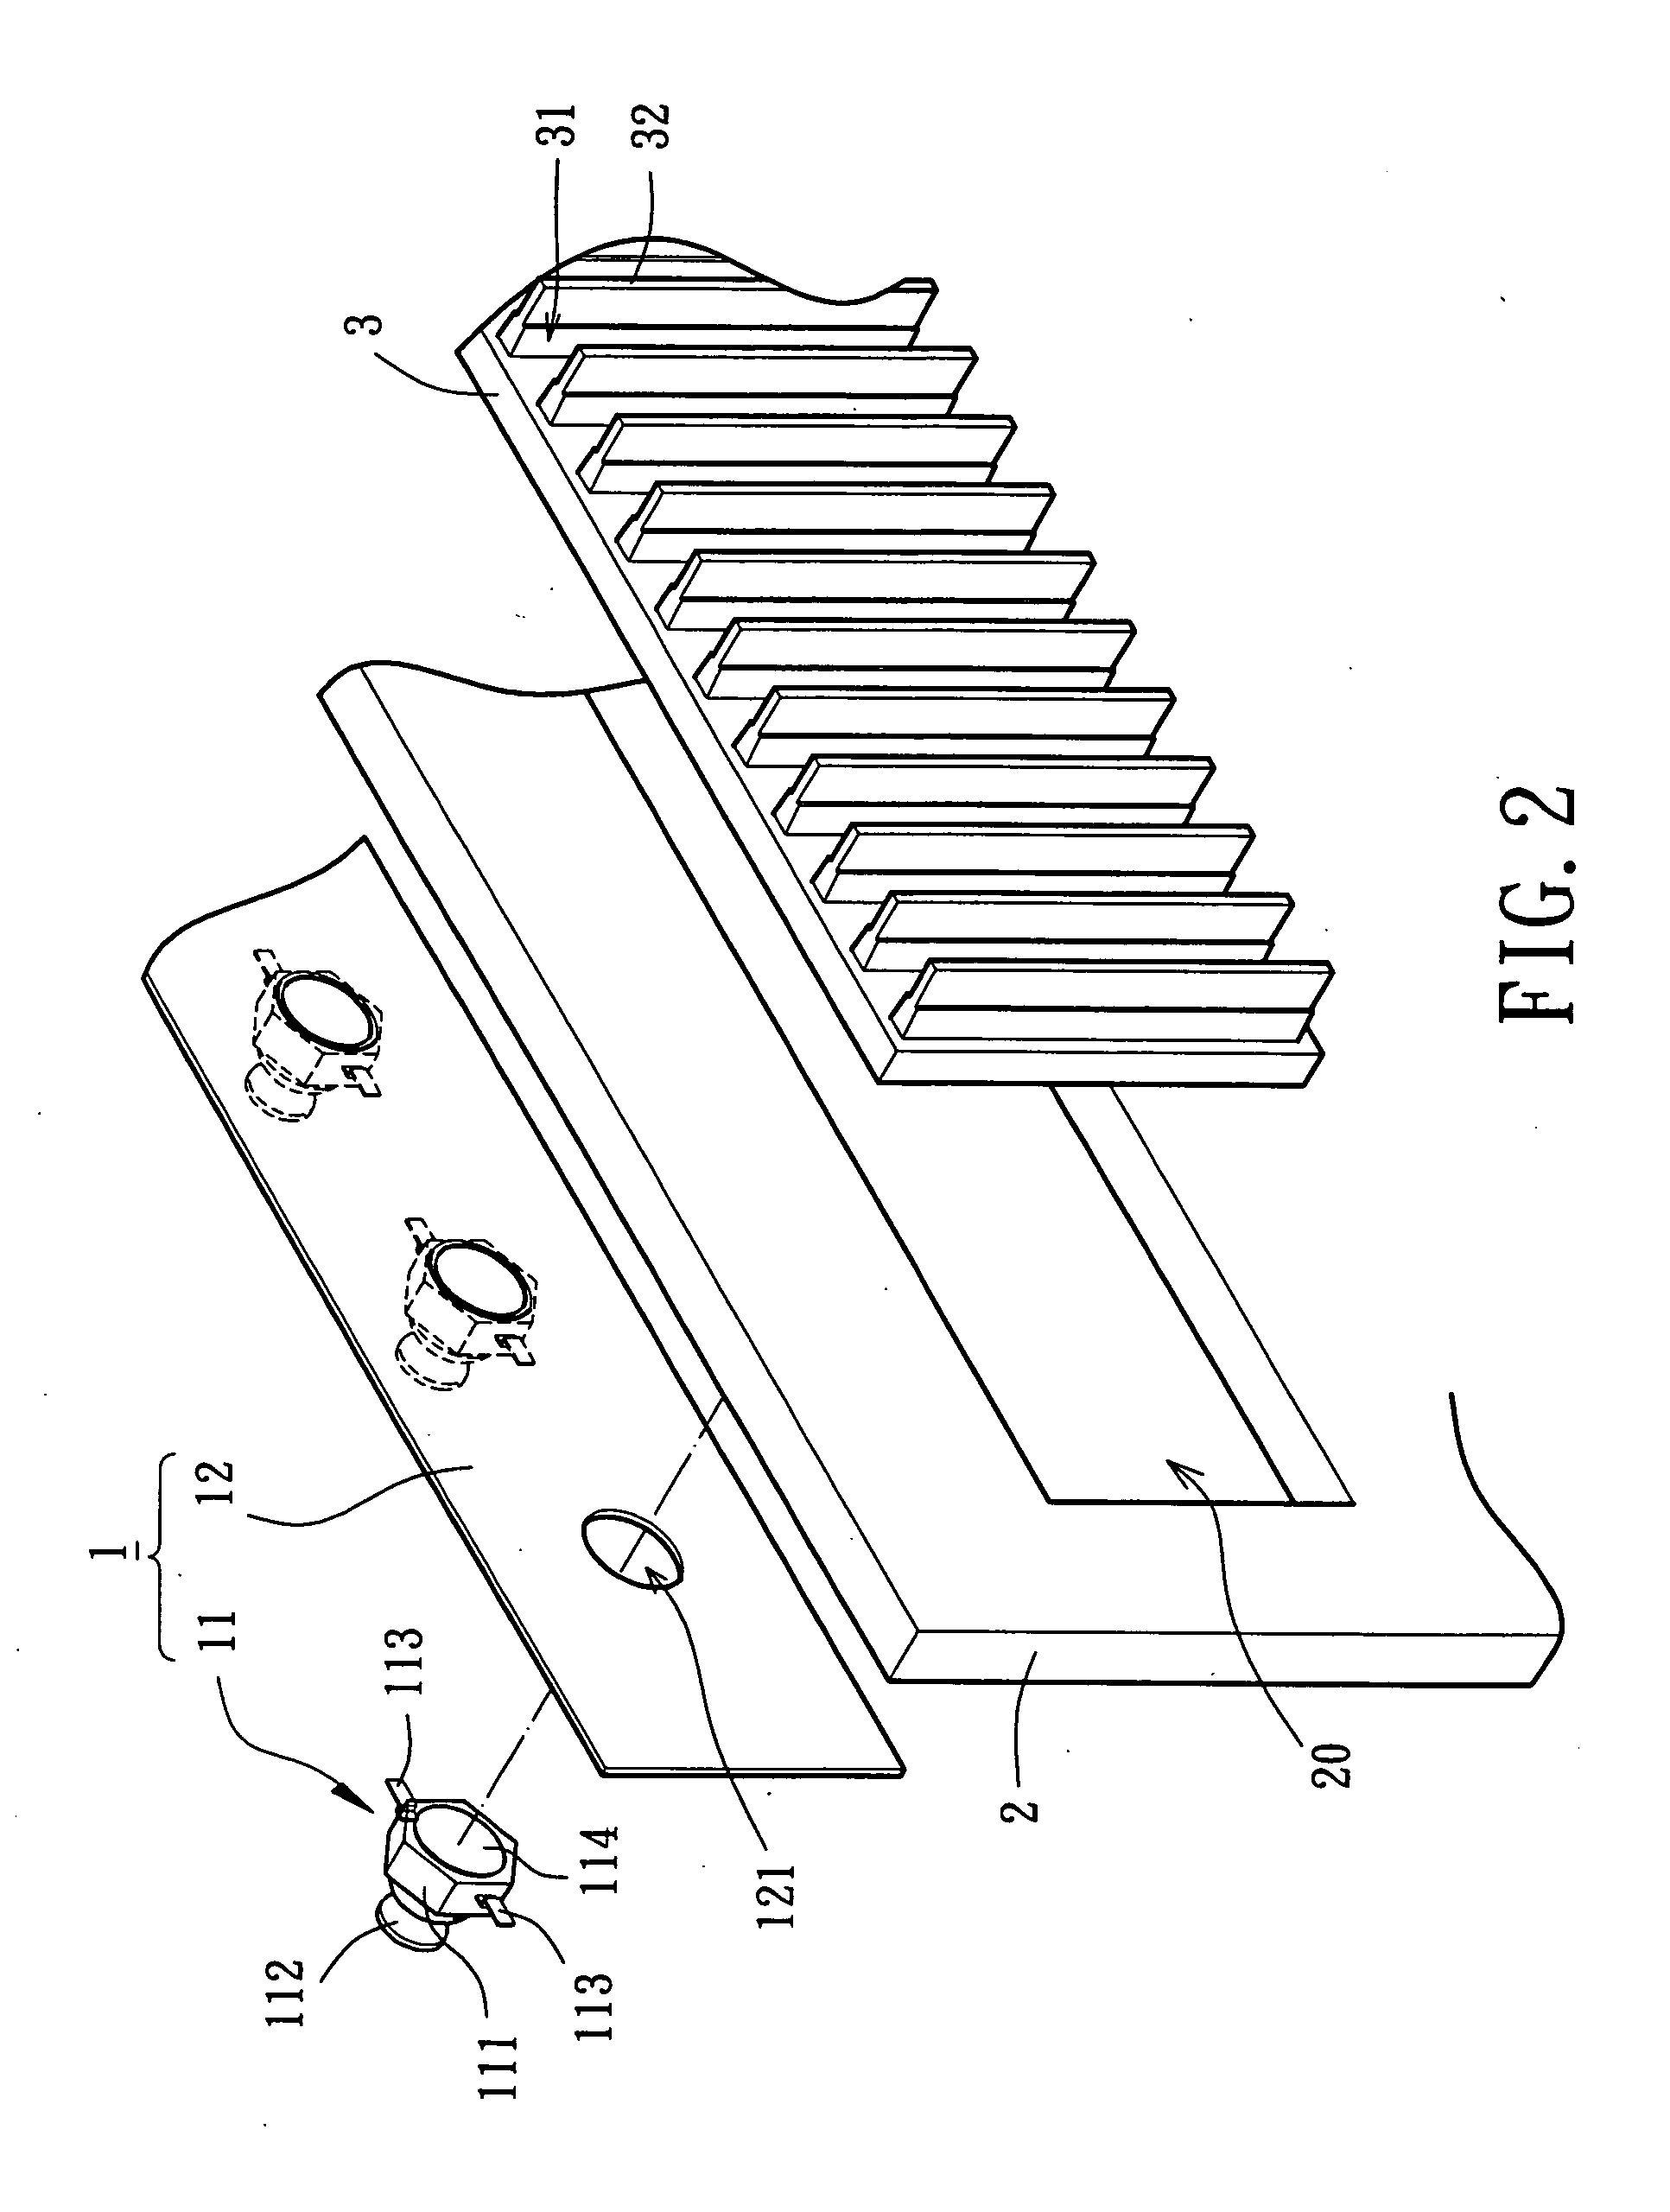 Heat-dissipating device for back light source for flat panel display